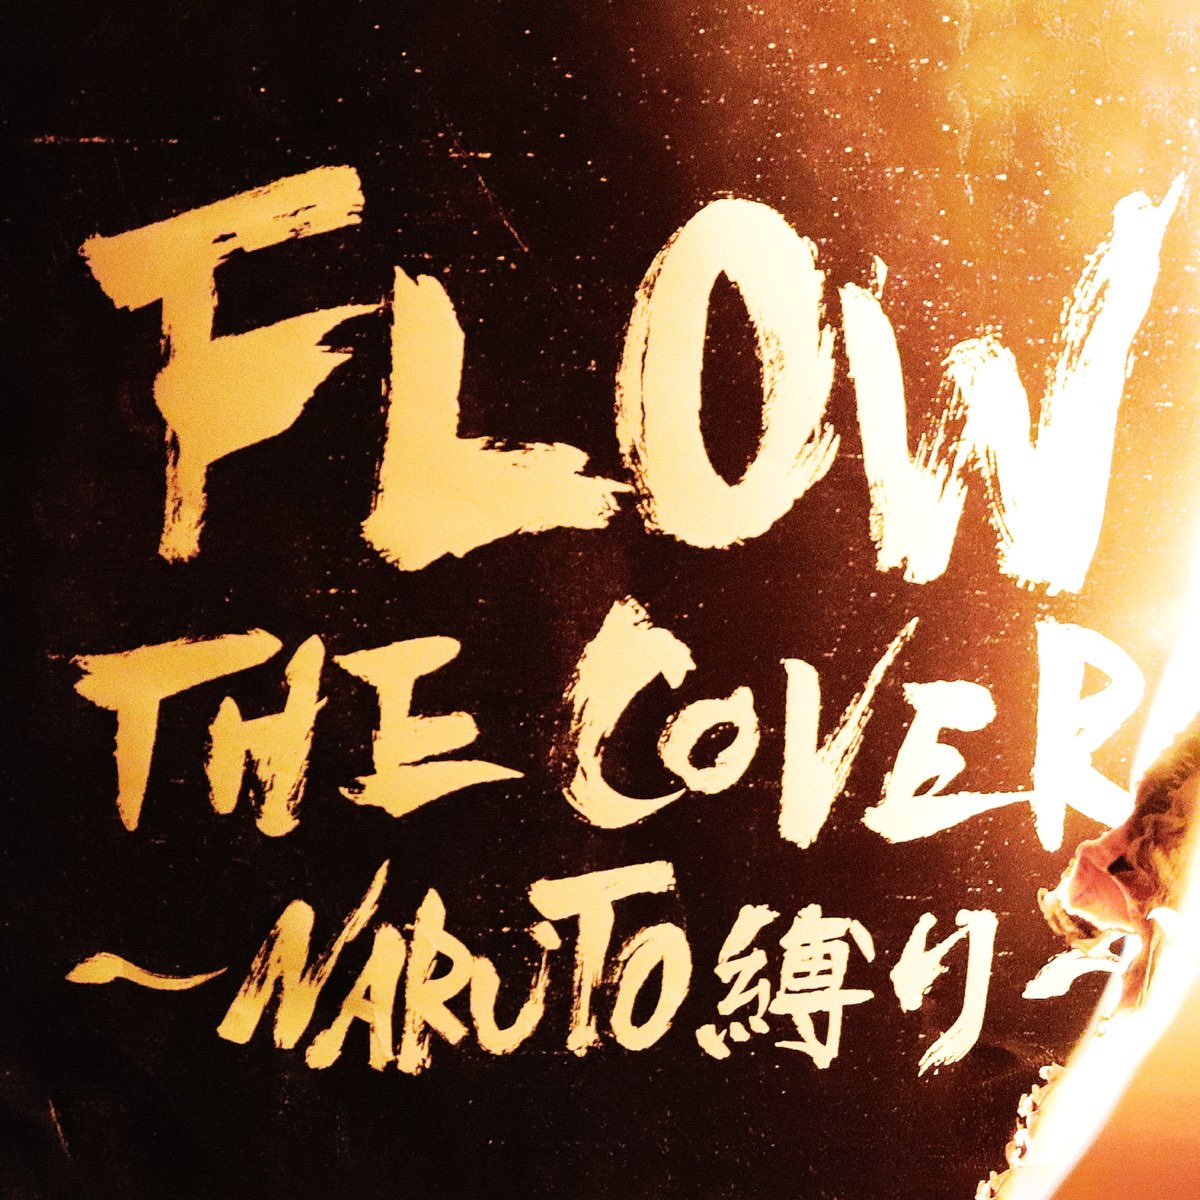 FLOW THE COVER ～NARUTO縛り～ - FLOWのアルバム - Apple Music